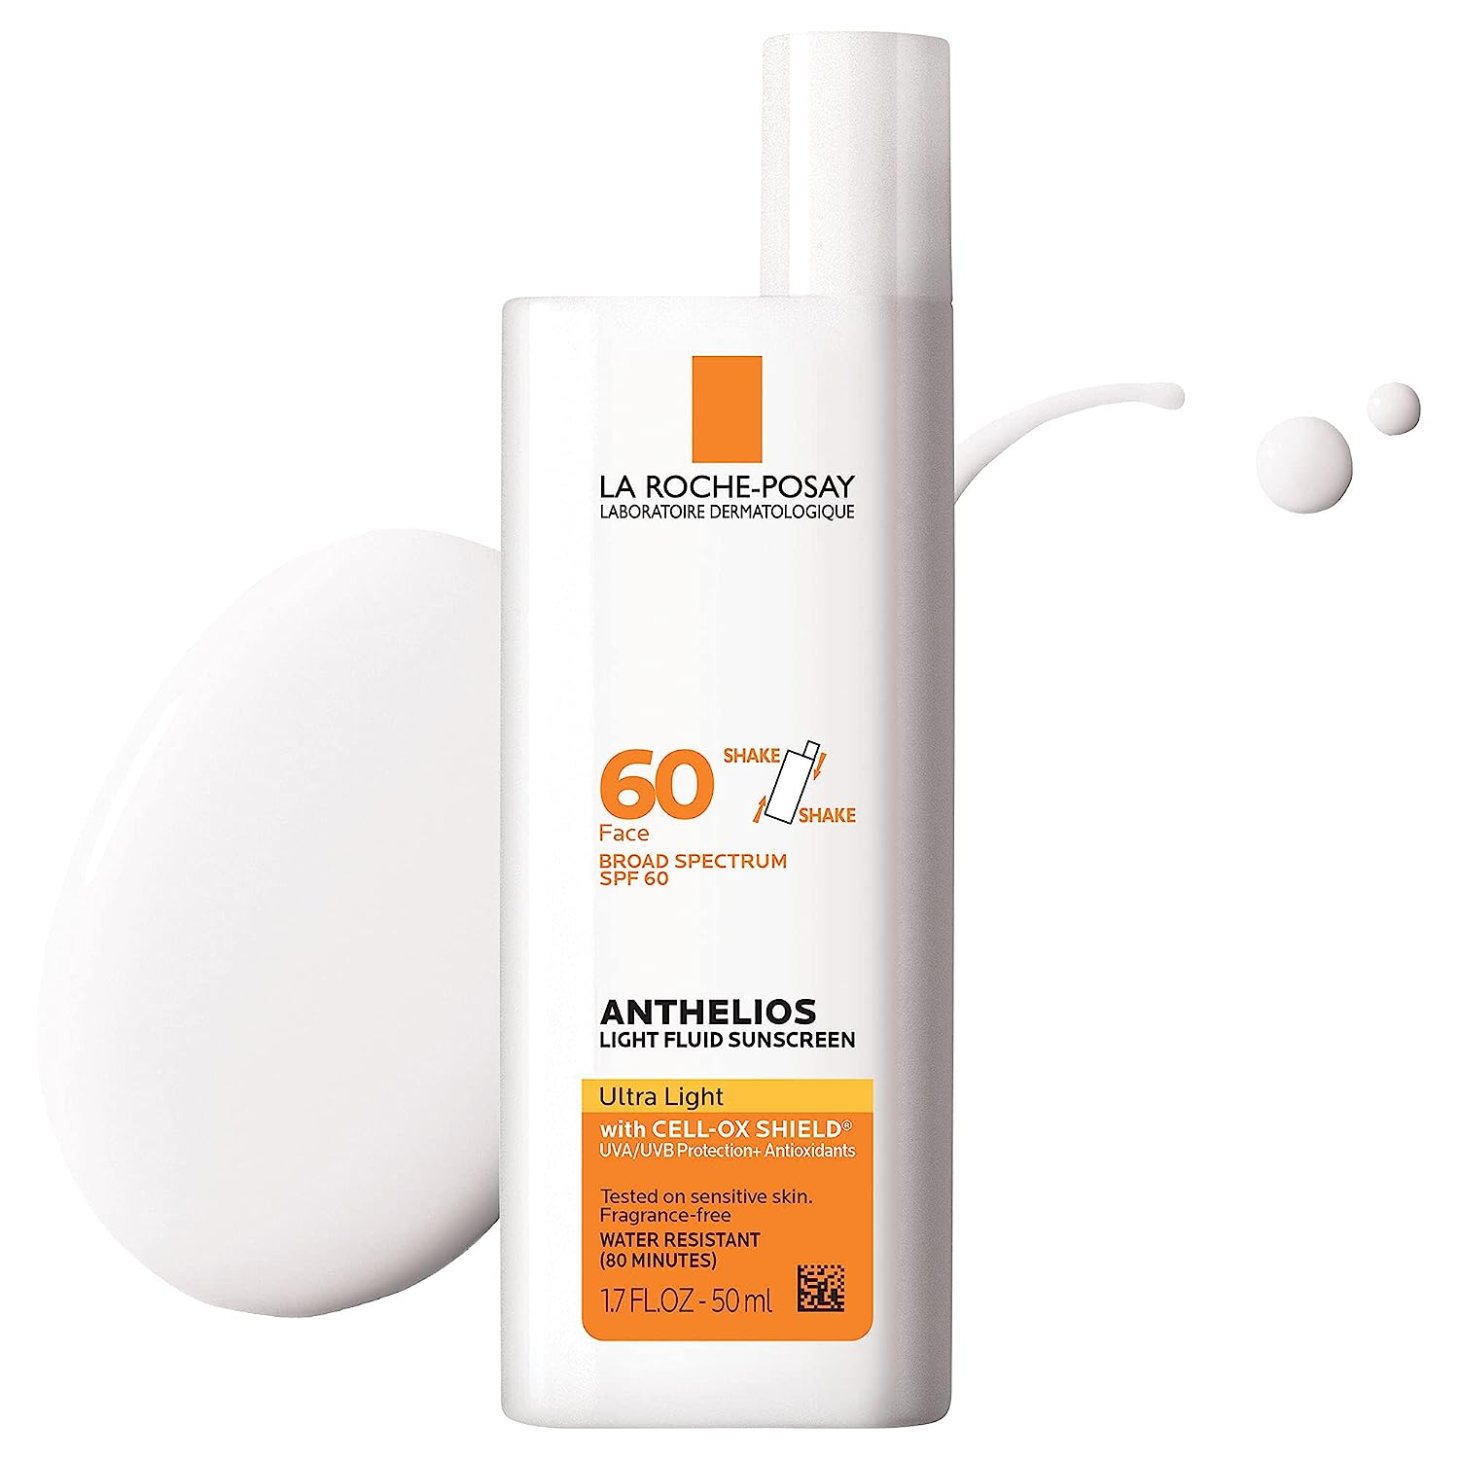 La Roche-Posay Anthelios Light Fluid Face Sunscreen SPF 60, sunscreens for acen prone skin